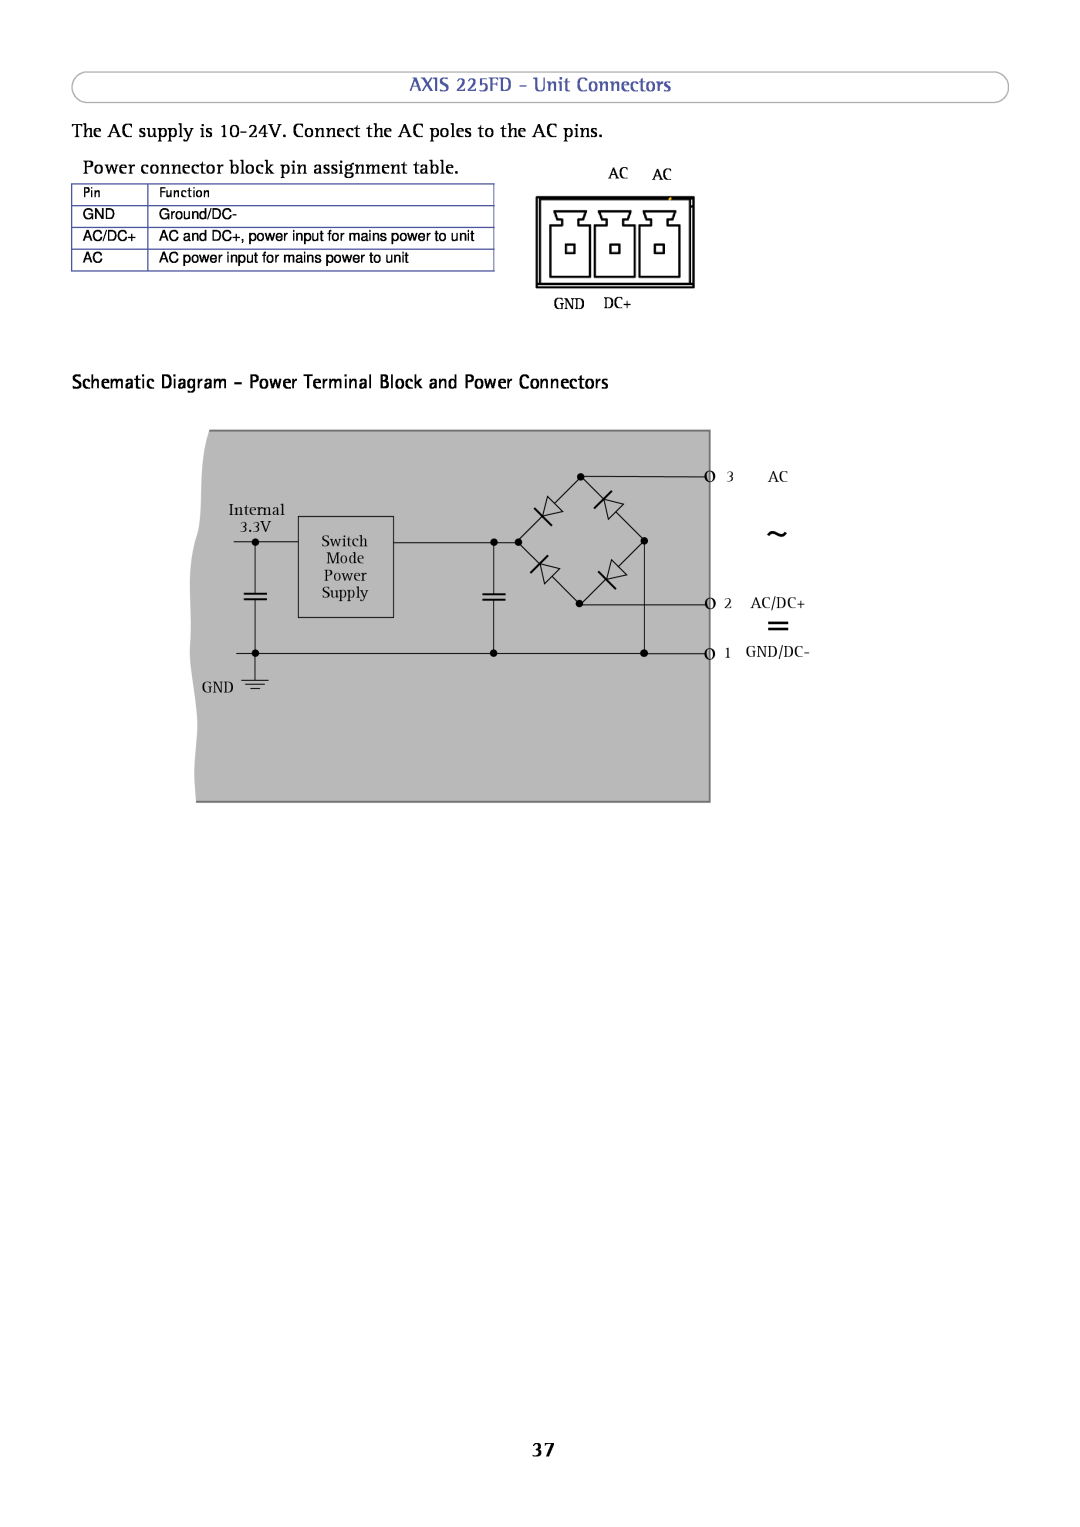 Axis Communications axis fixed dome network camera Schematic Diagram - Power Terminal Block and Power Connectors, Function 